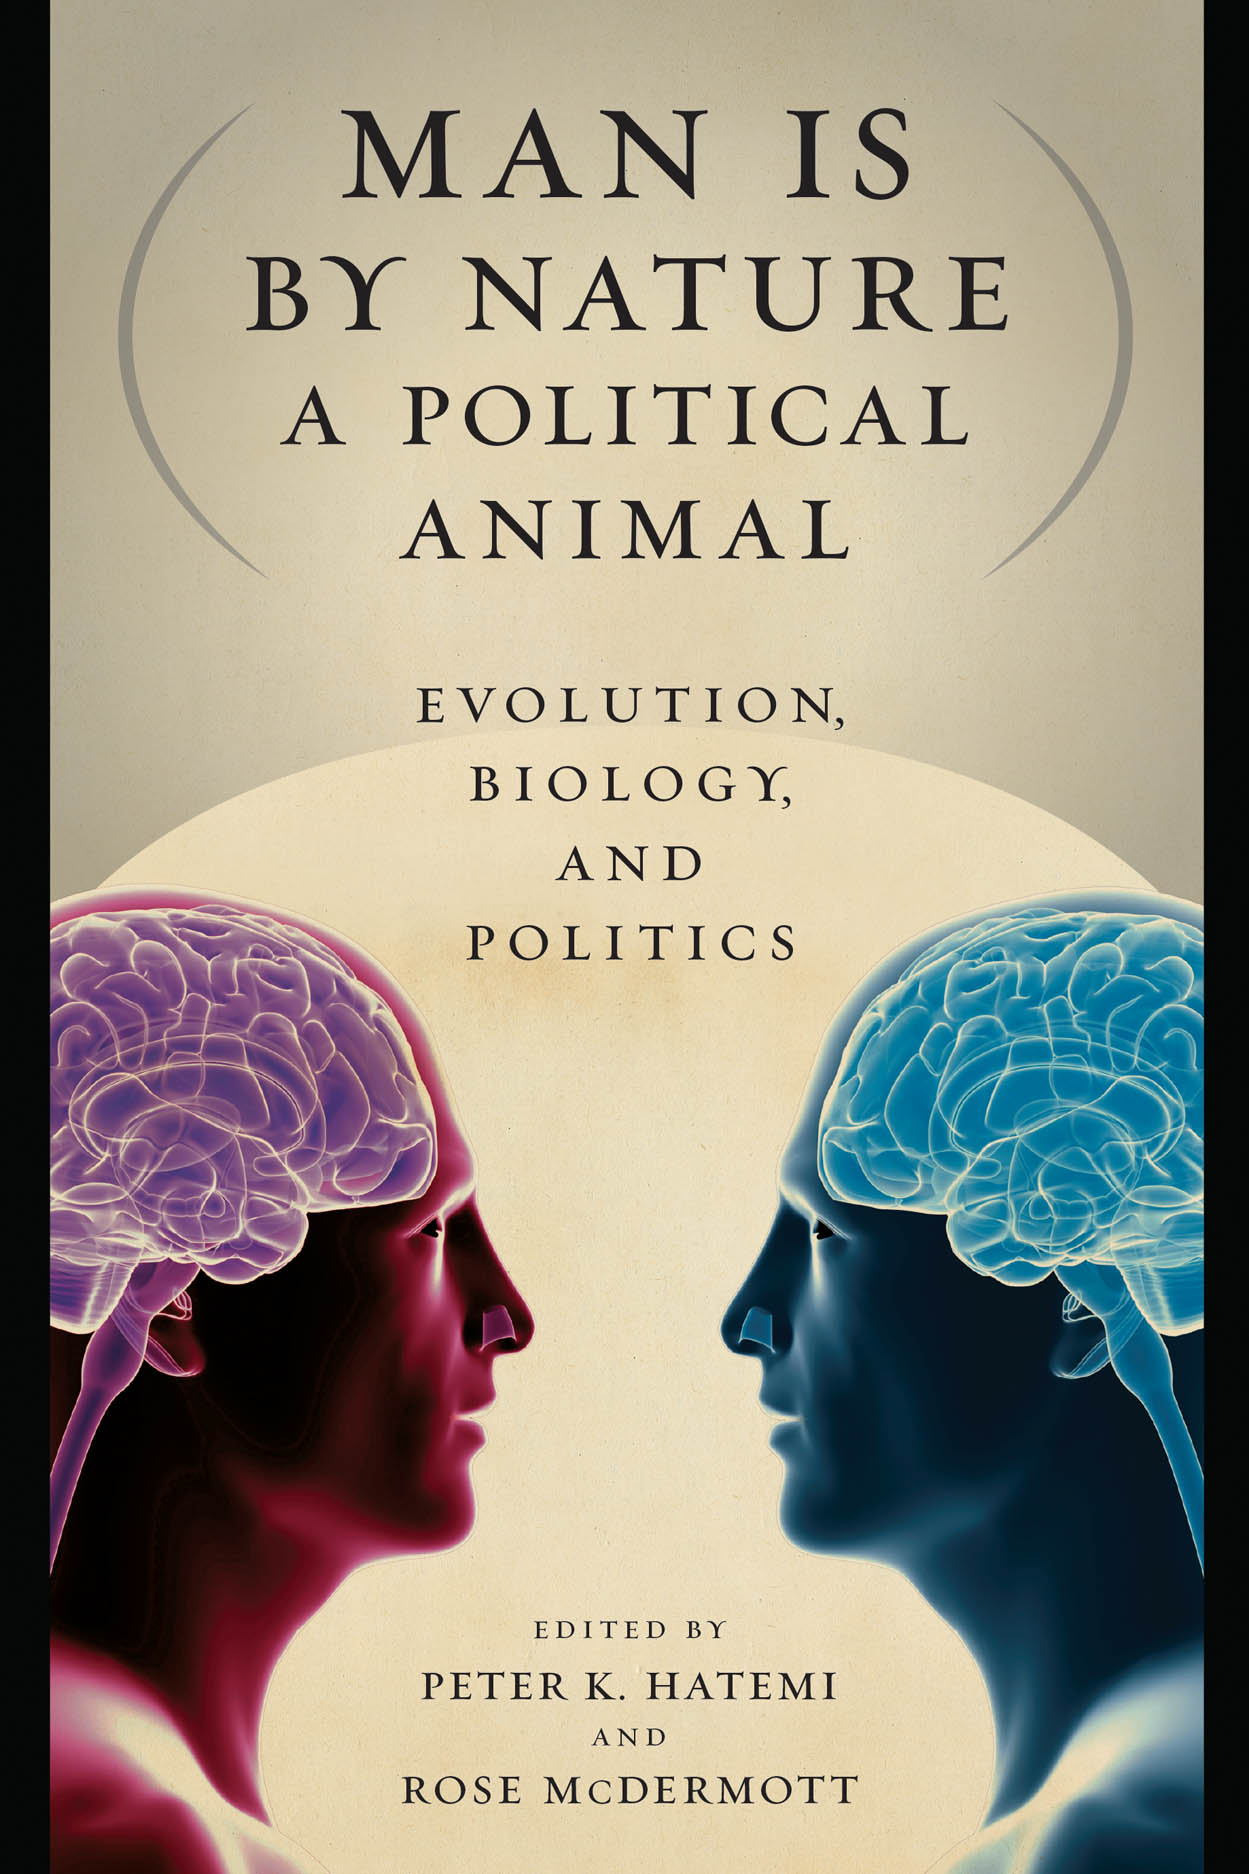 Man Is by Nature a Political Animal: Evolution, Biology, and Politics,  Hatemi, McDermott